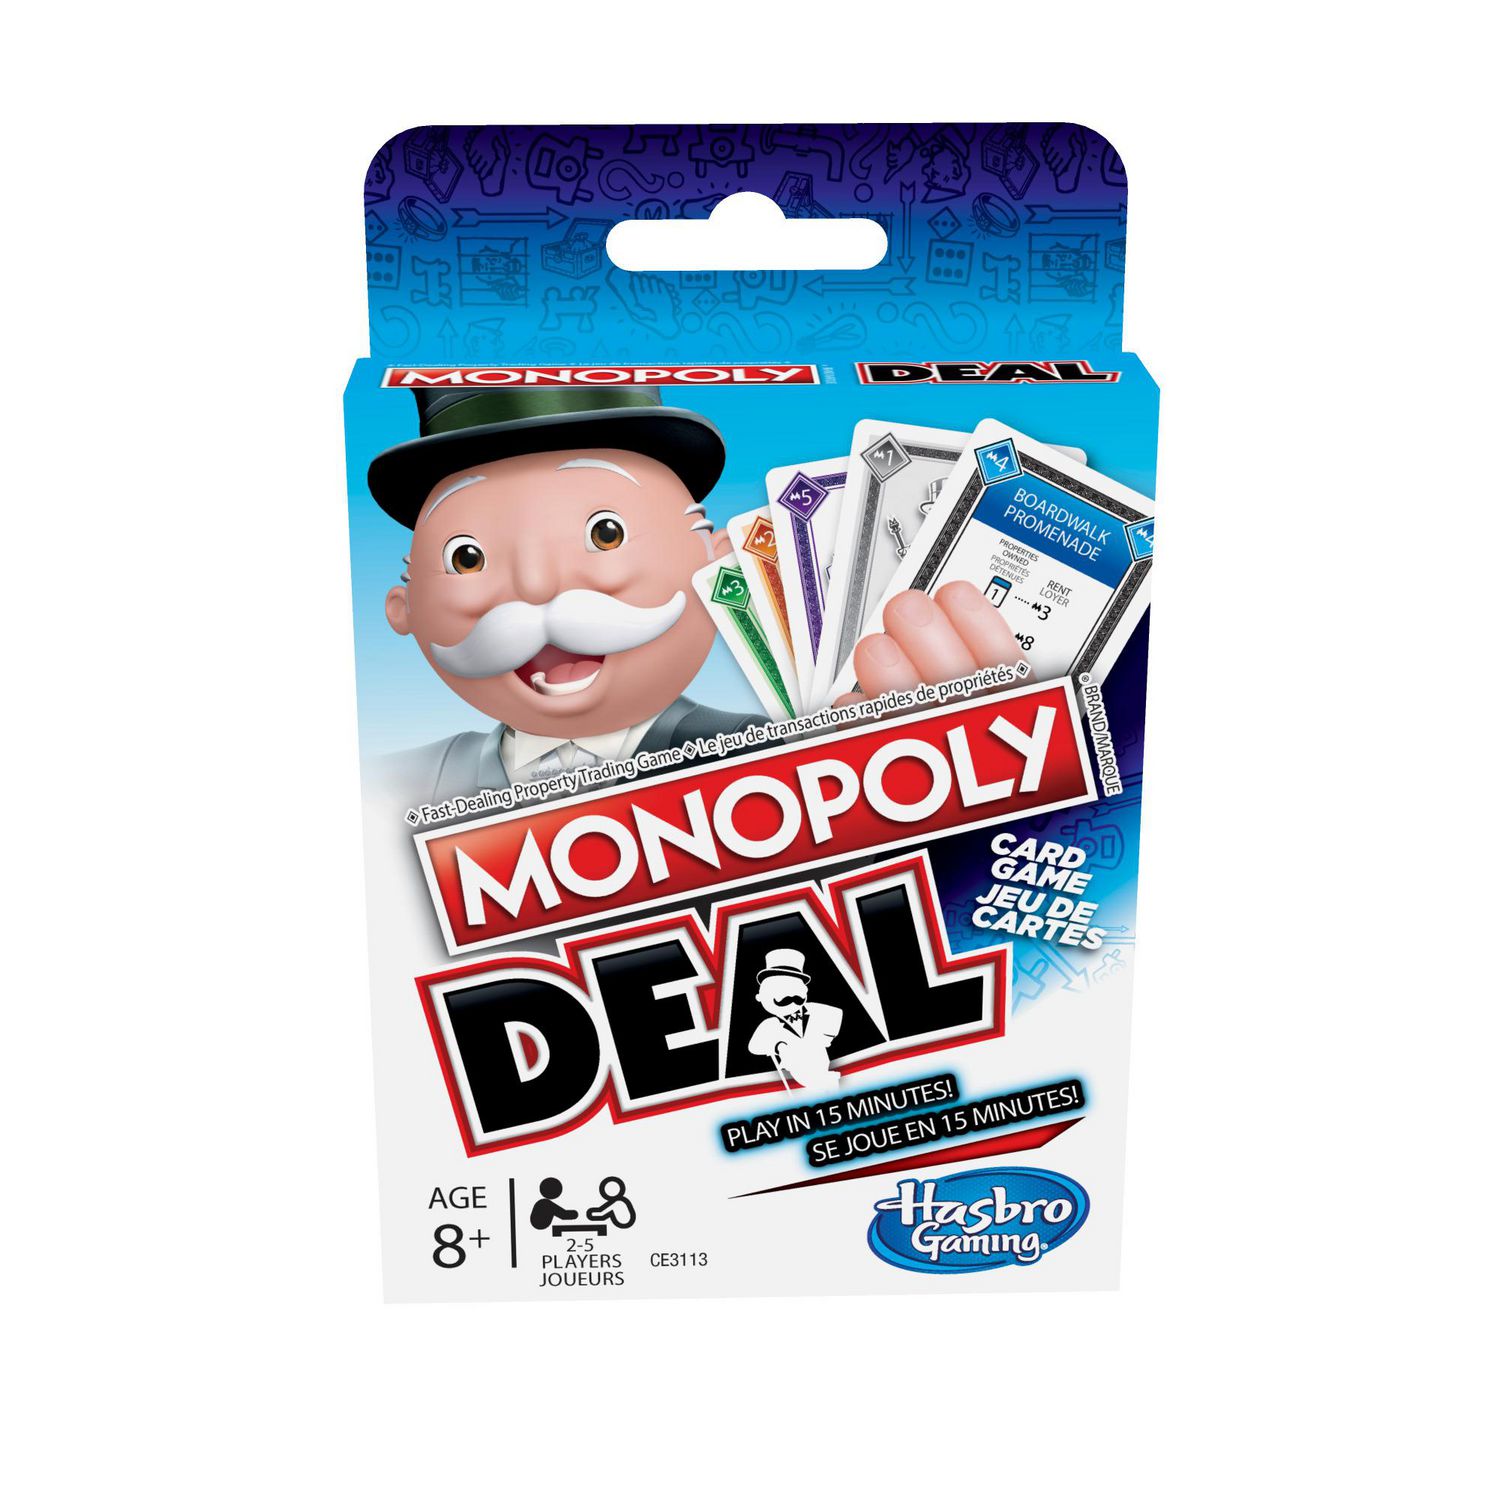 and　Monopoly　up　Game,　Card　Deal　Gaming　Hasbro　Ages